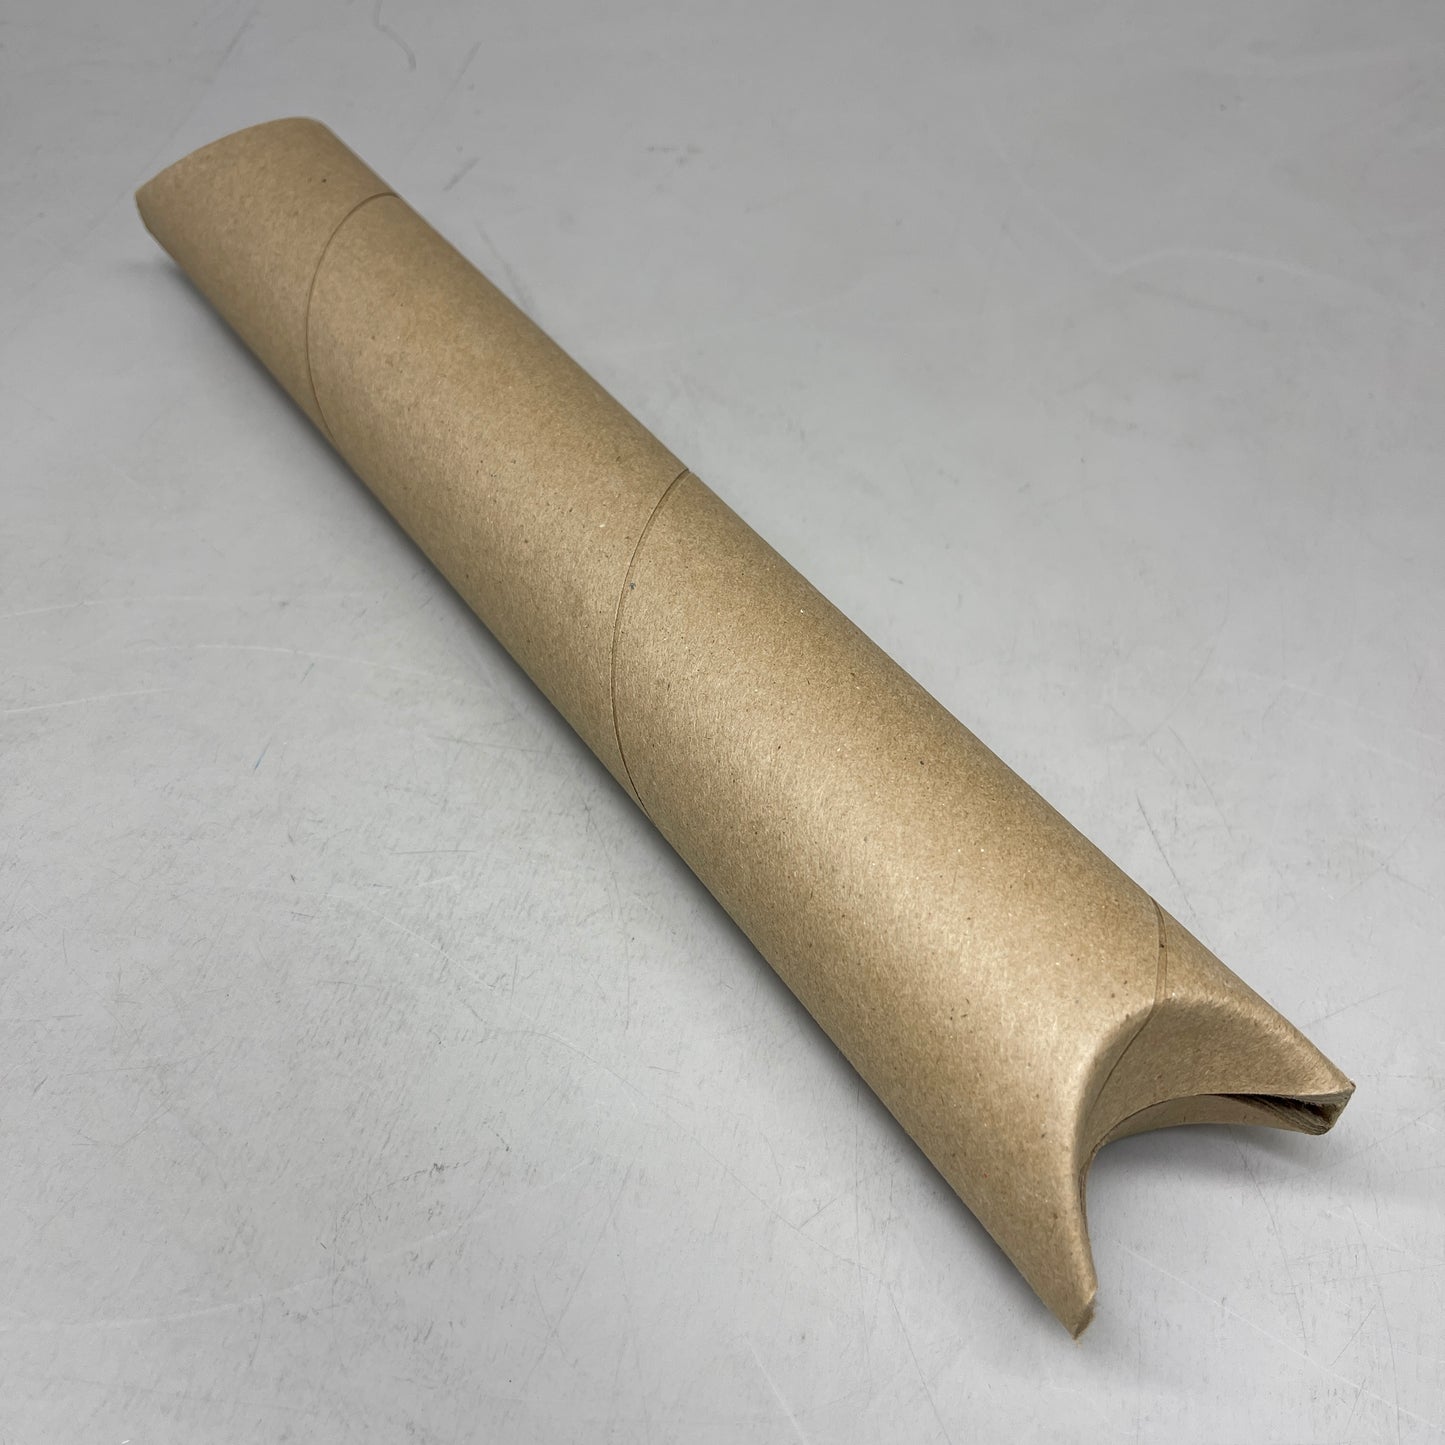 Z@ 38 PACK! Cardboard Mailing Tube or Pirate's Spyglass - YOU CHOOSE! 12” L x 2” D